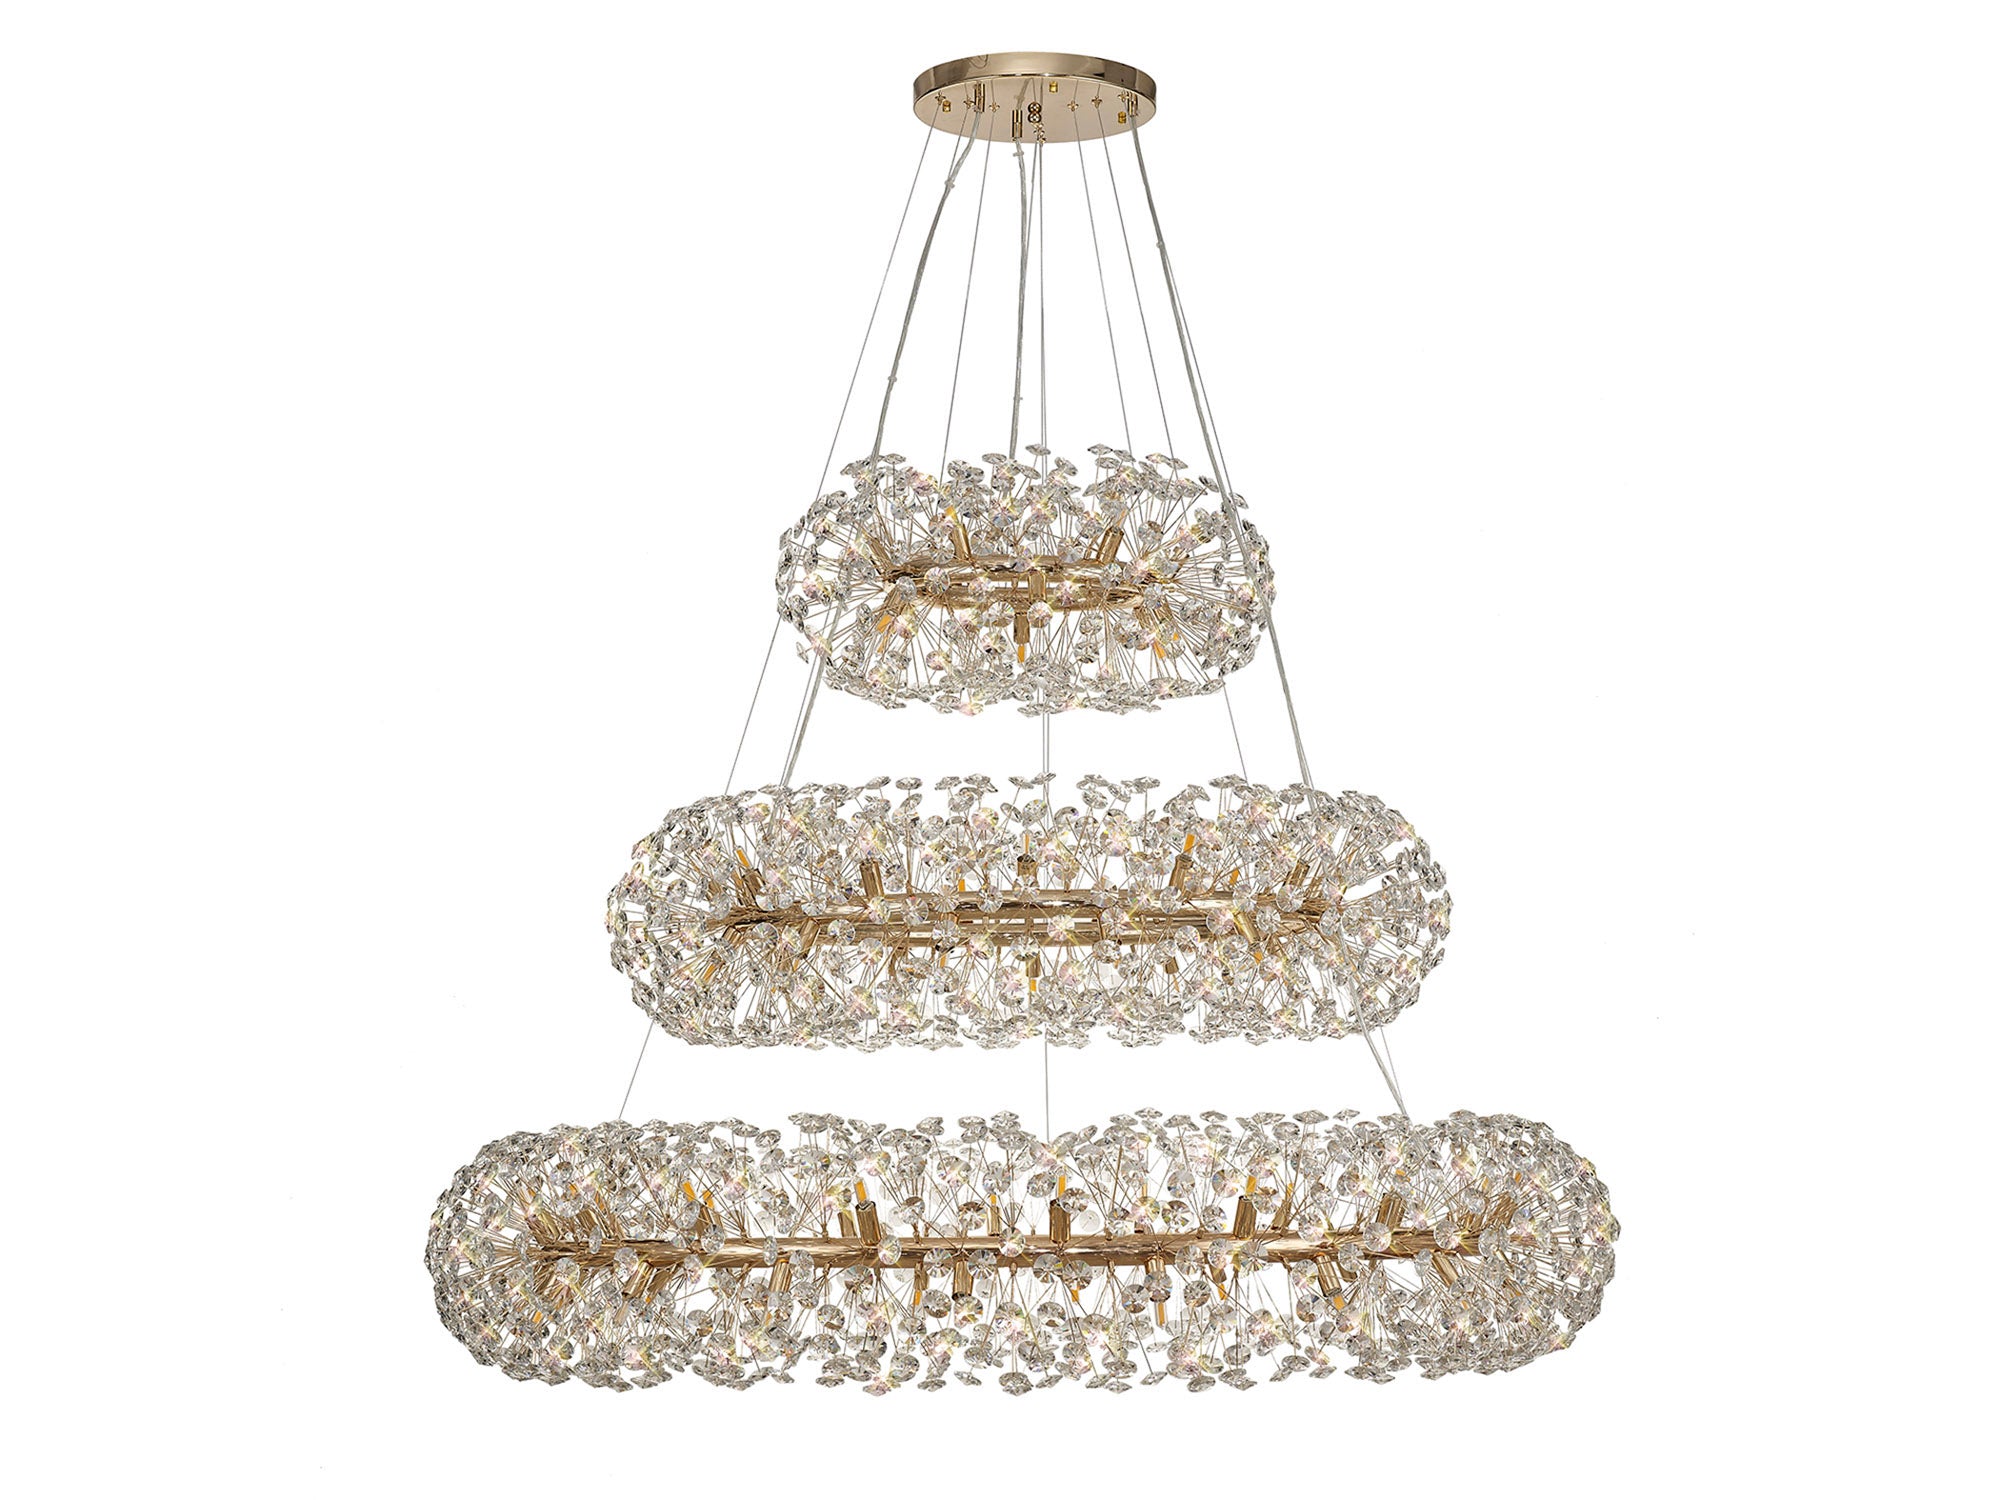 Chakkar 3 Tier Chandelier 74 Light G9 French Gold/Crystal, Item Weight: 37.6kg LO182083